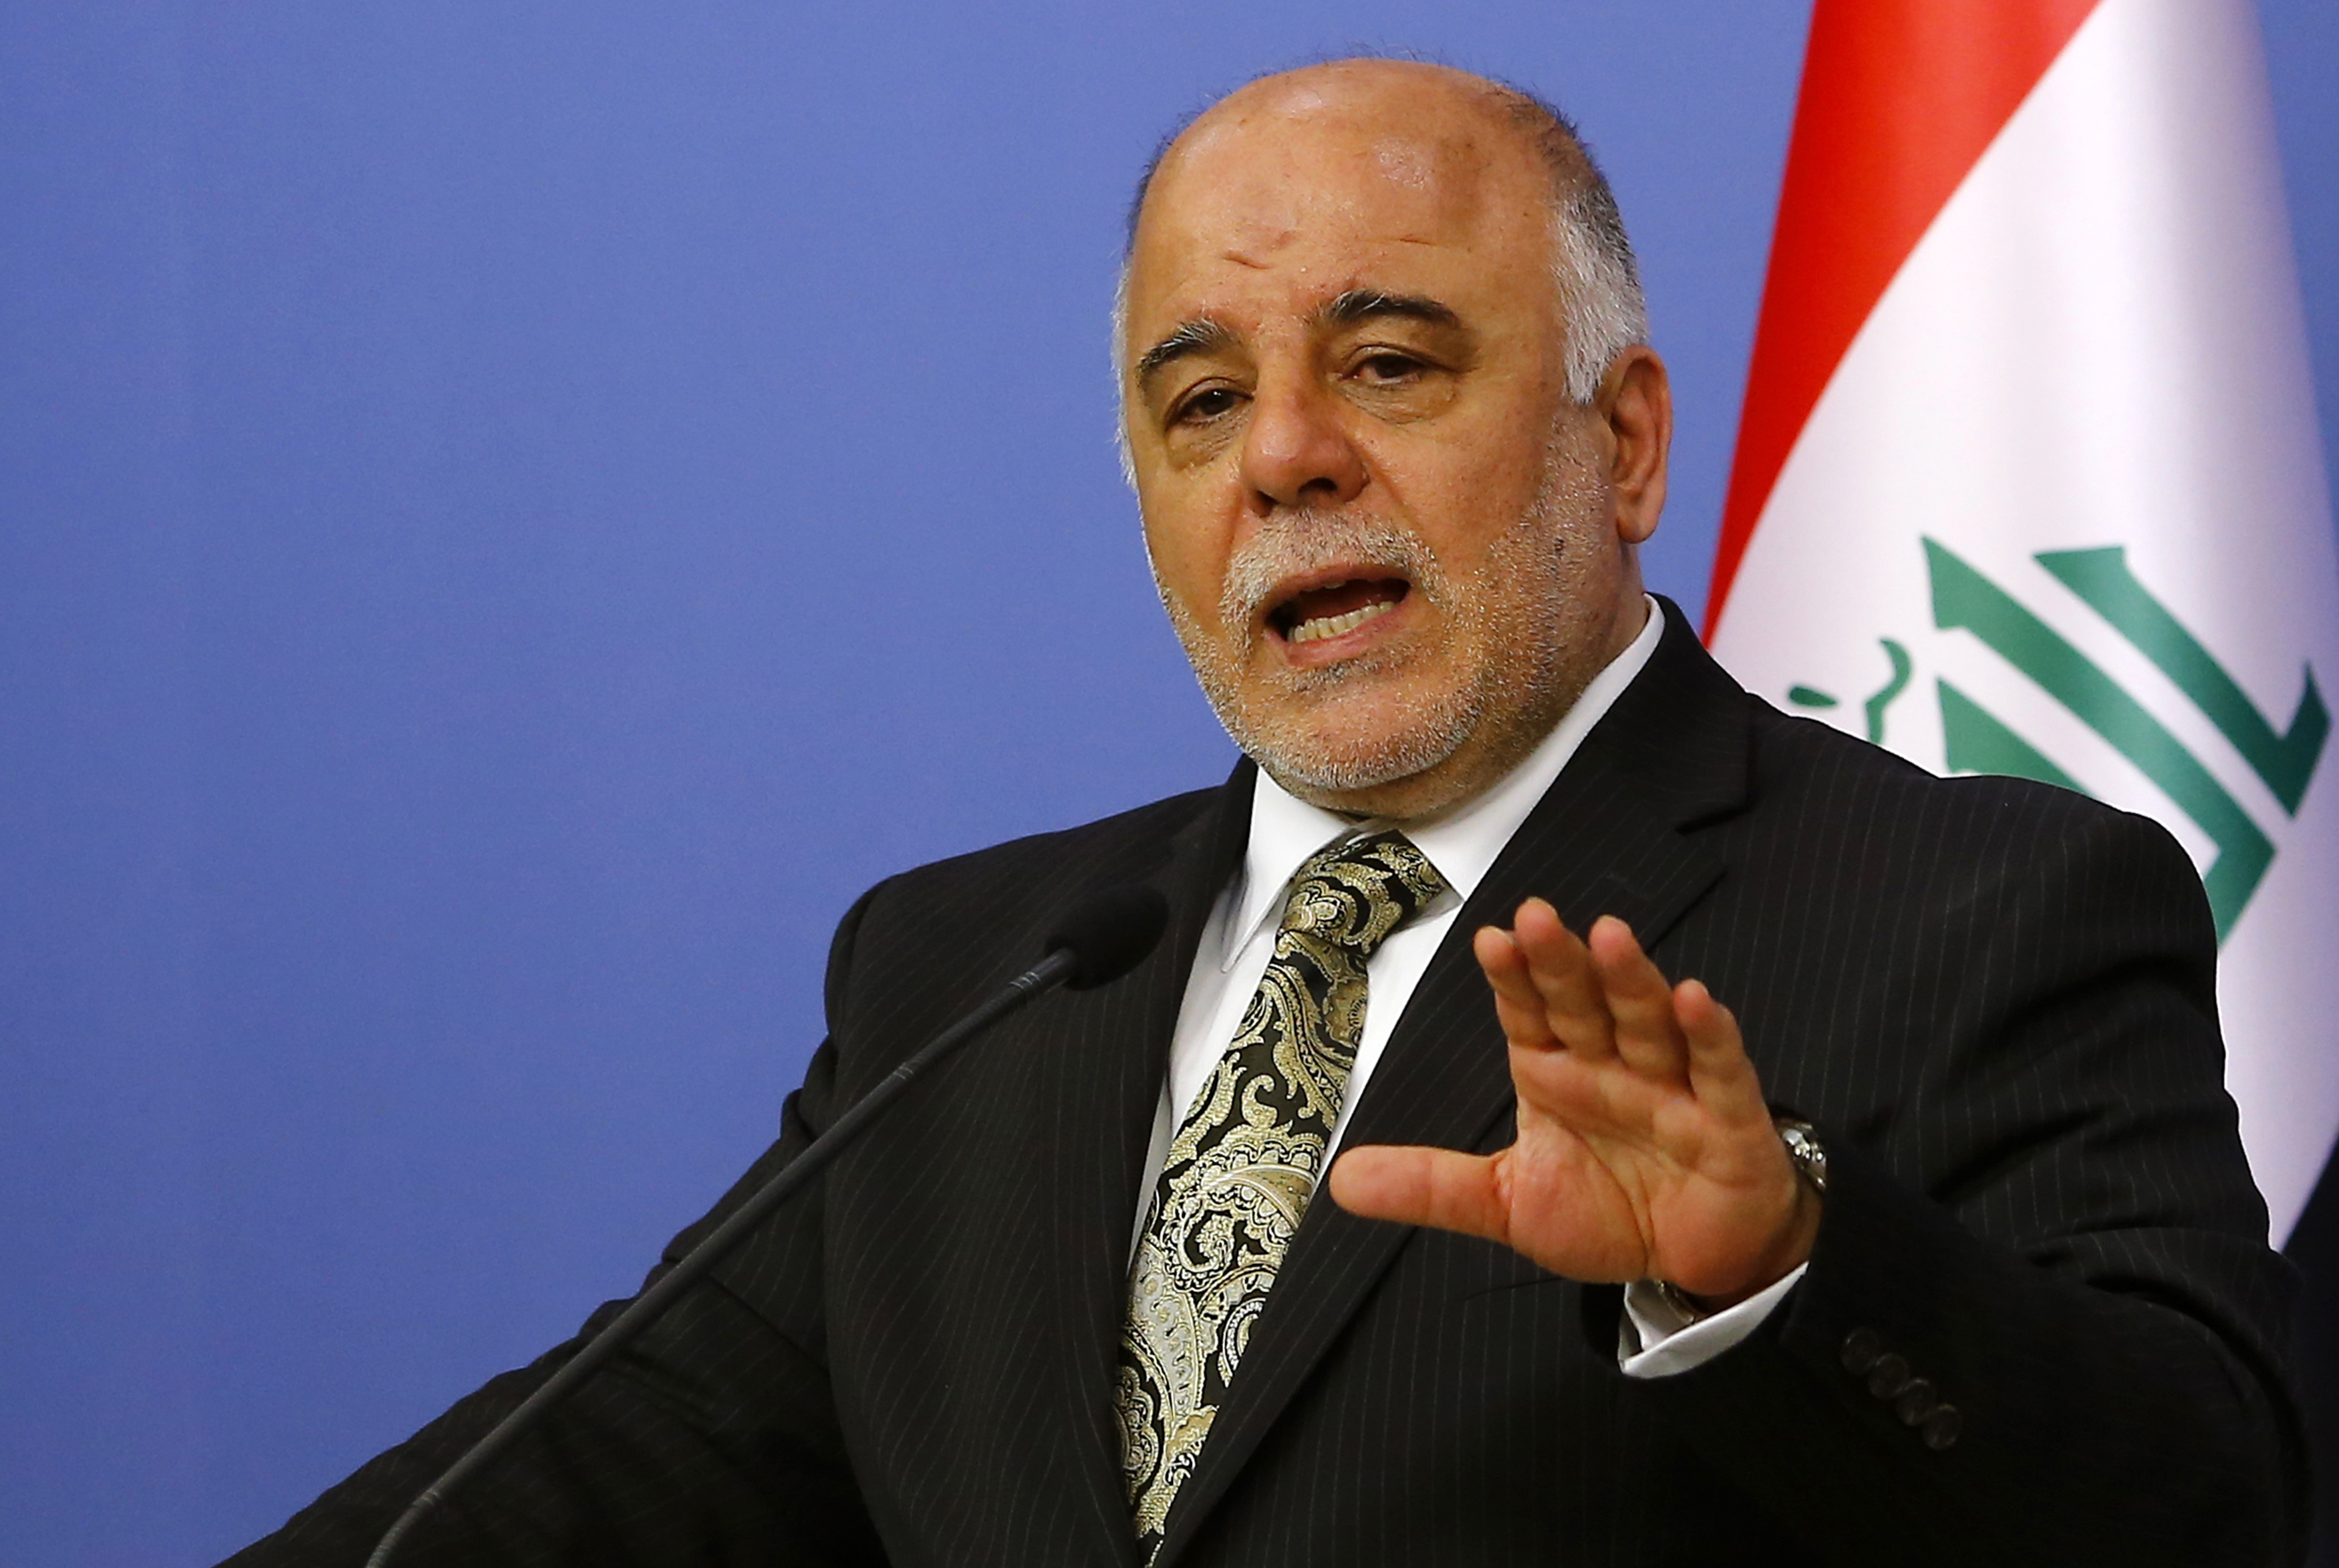 Iraqi PM calls for strengthening ties with Iran